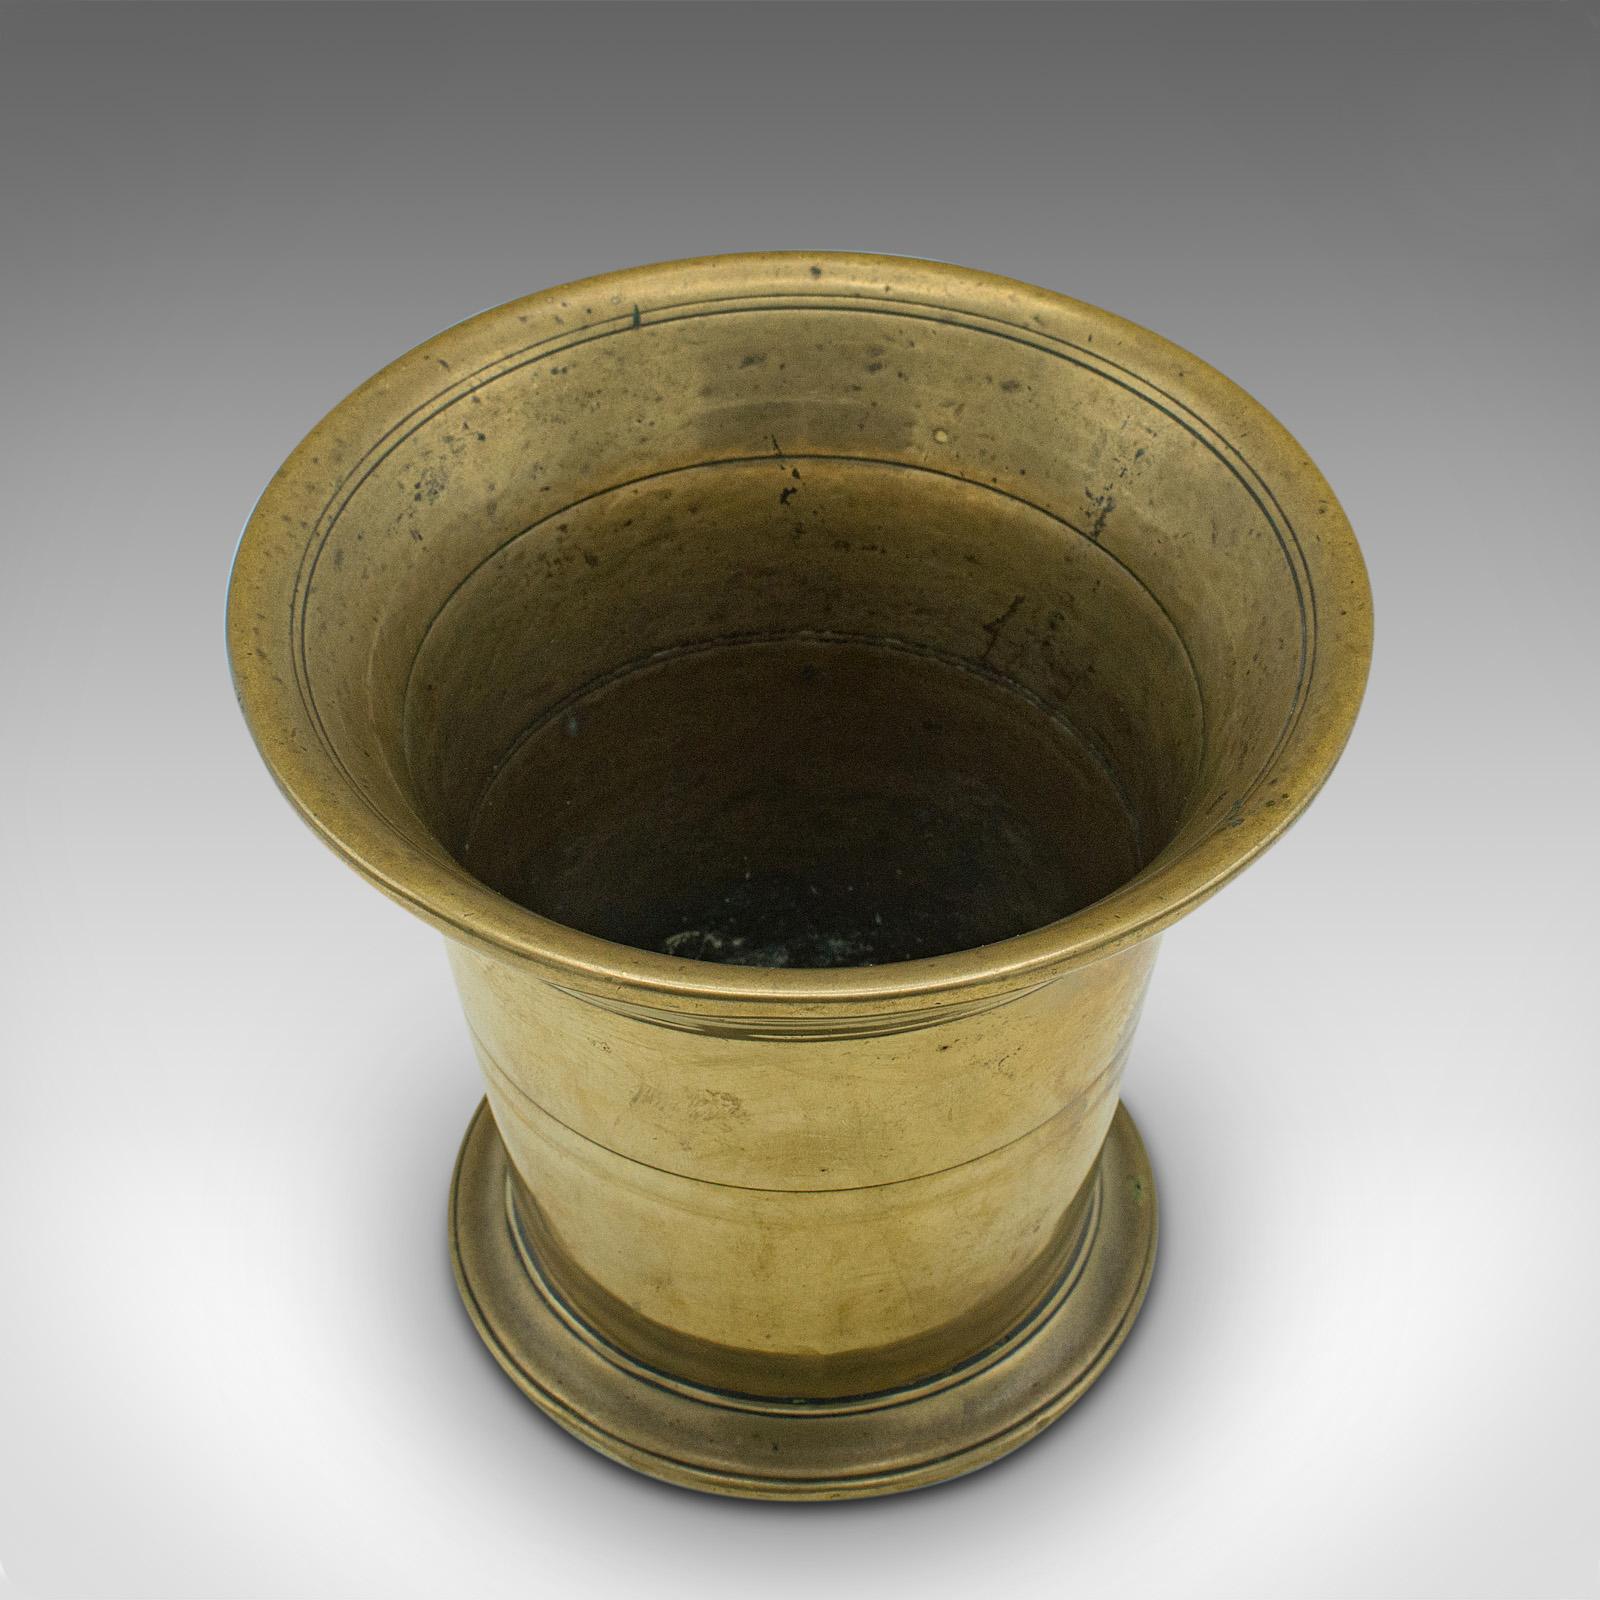 19th Century Antique Apothecary Mortar and Pestle, English, Brass, Chemist, Victorian, C.1850 For Sale